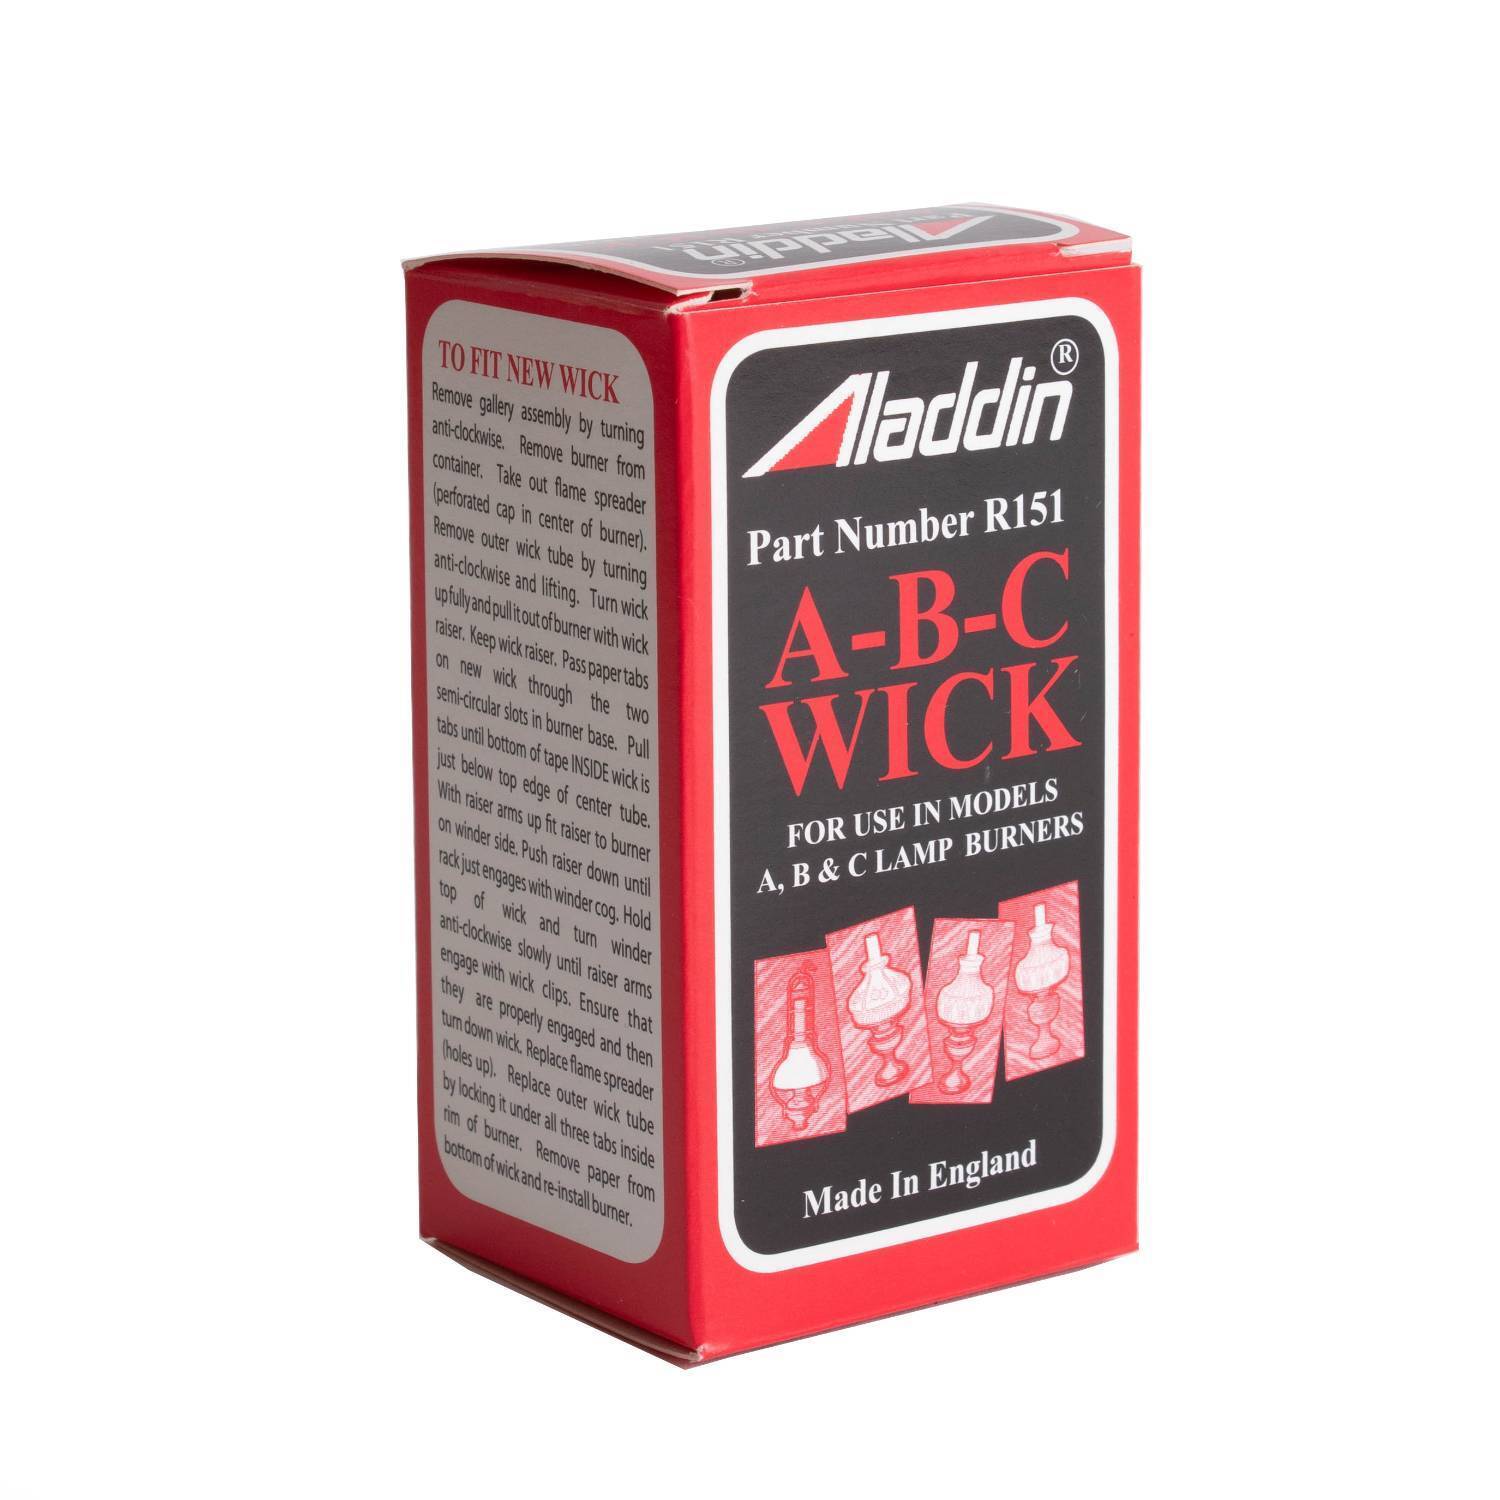 Aladdin Wick #R151 for Models A, B, C and 21c